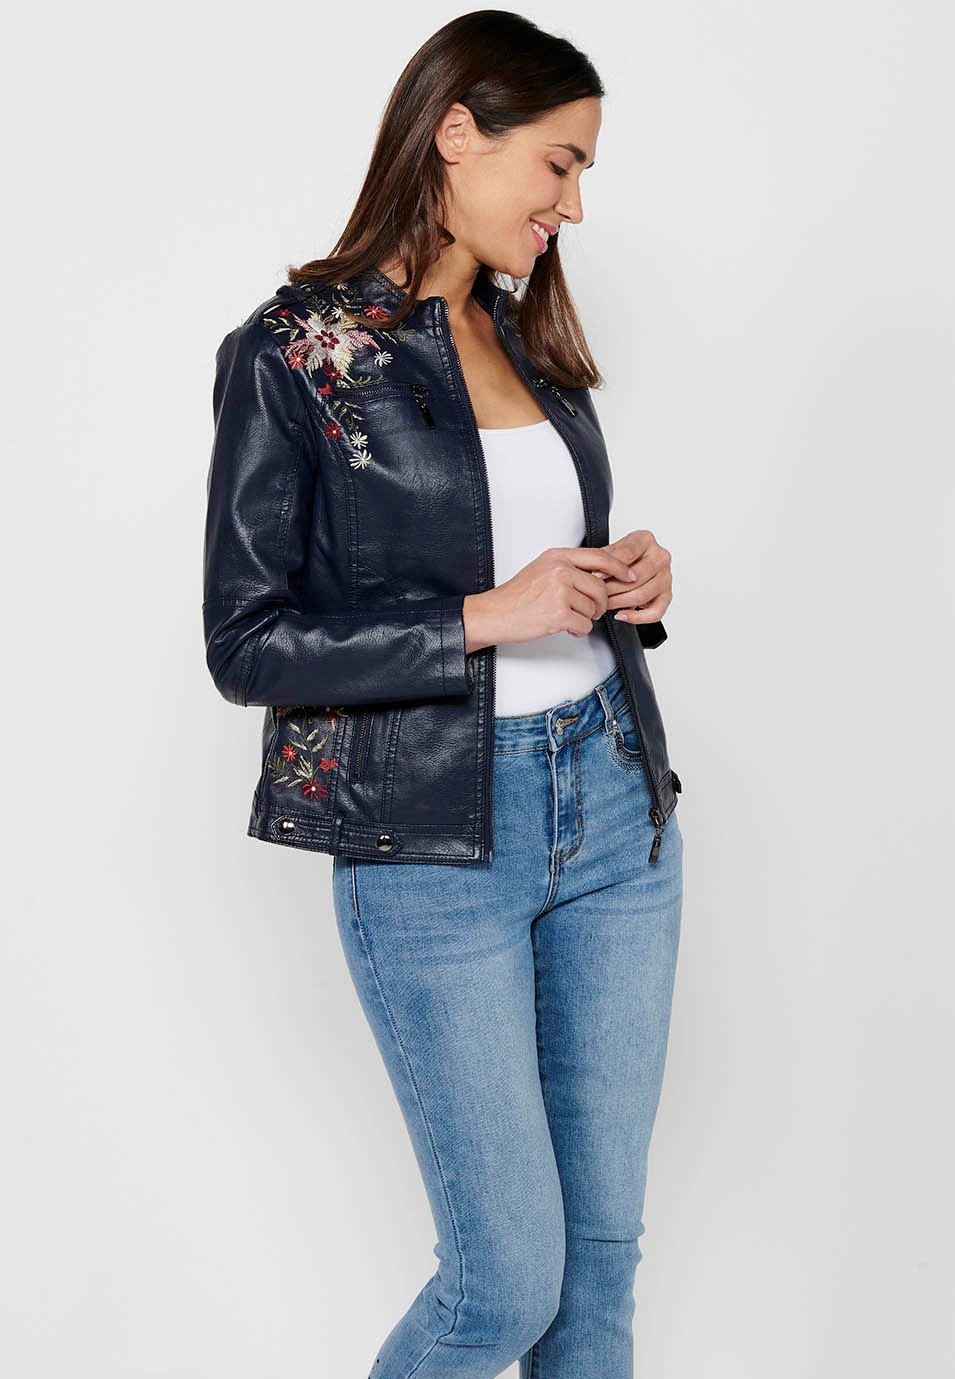 Leather-effect jacket with front zipper closure with floral embroidered details with round neck and front pockets in Navy for Women 2